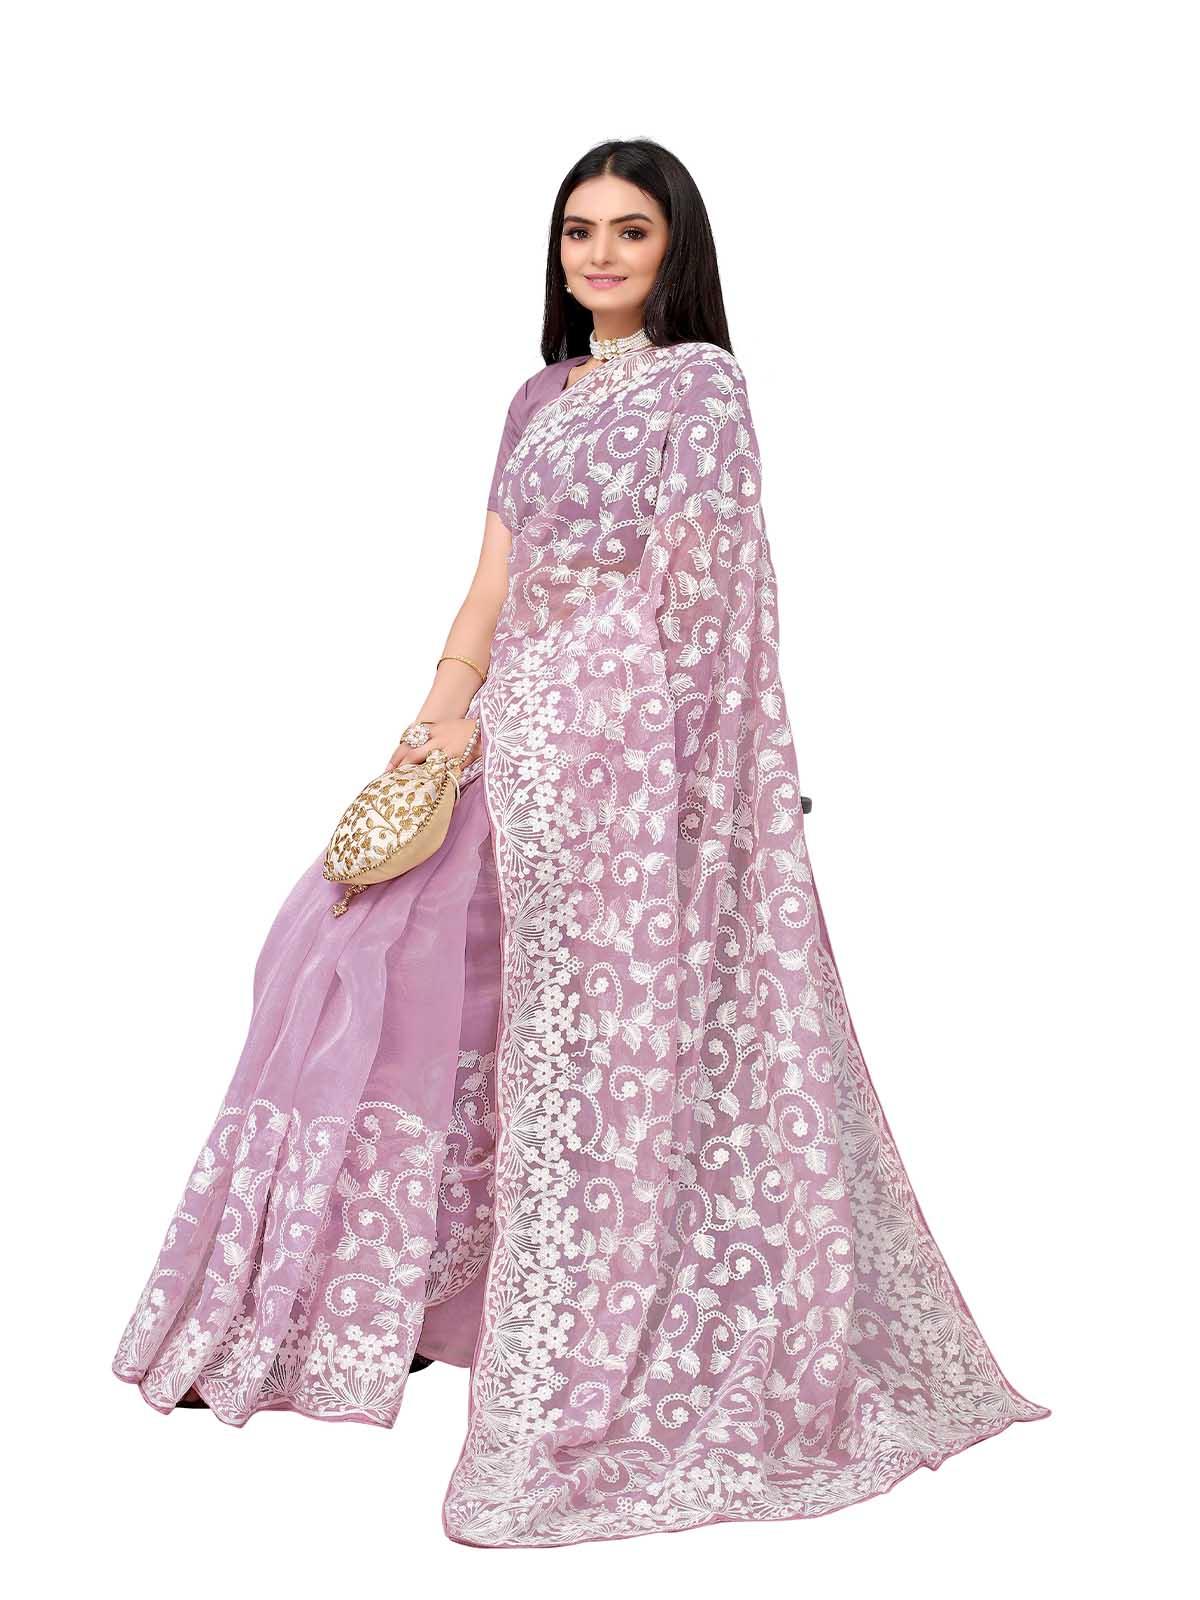 Women's Lilac Organza Embroidered Saree With Blouse - Odette